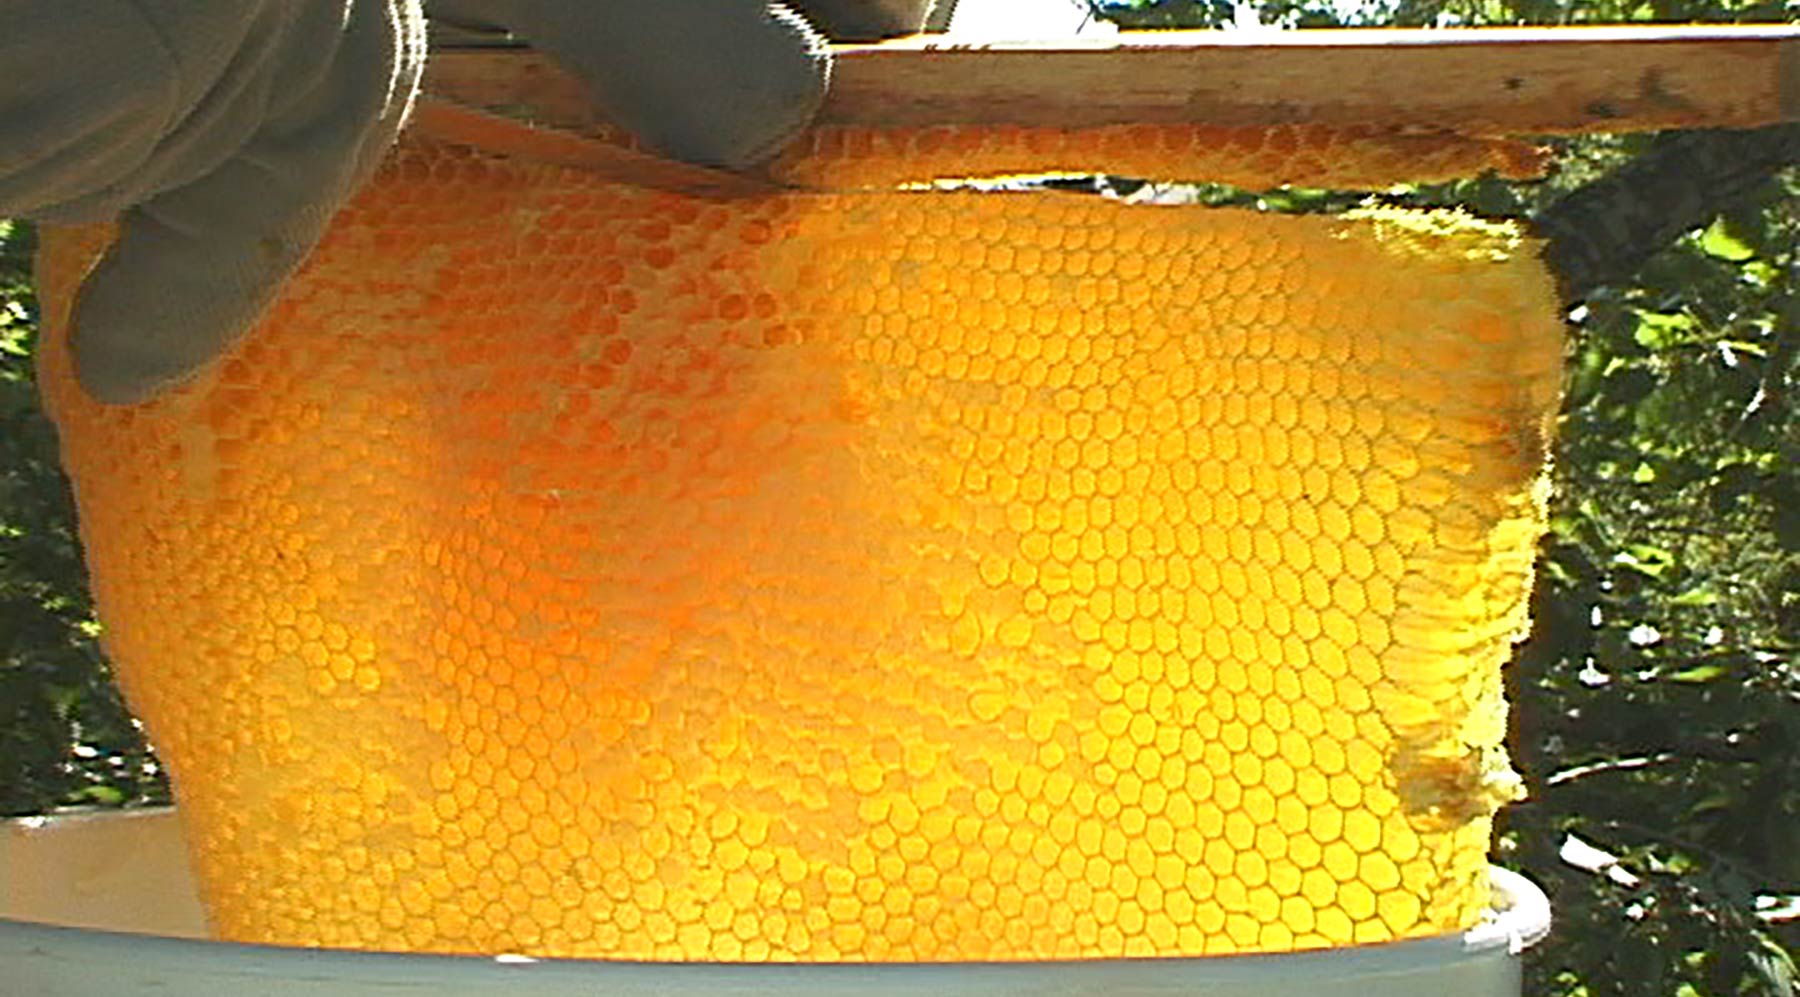 Harvesting Honey from a Top Bar Hive